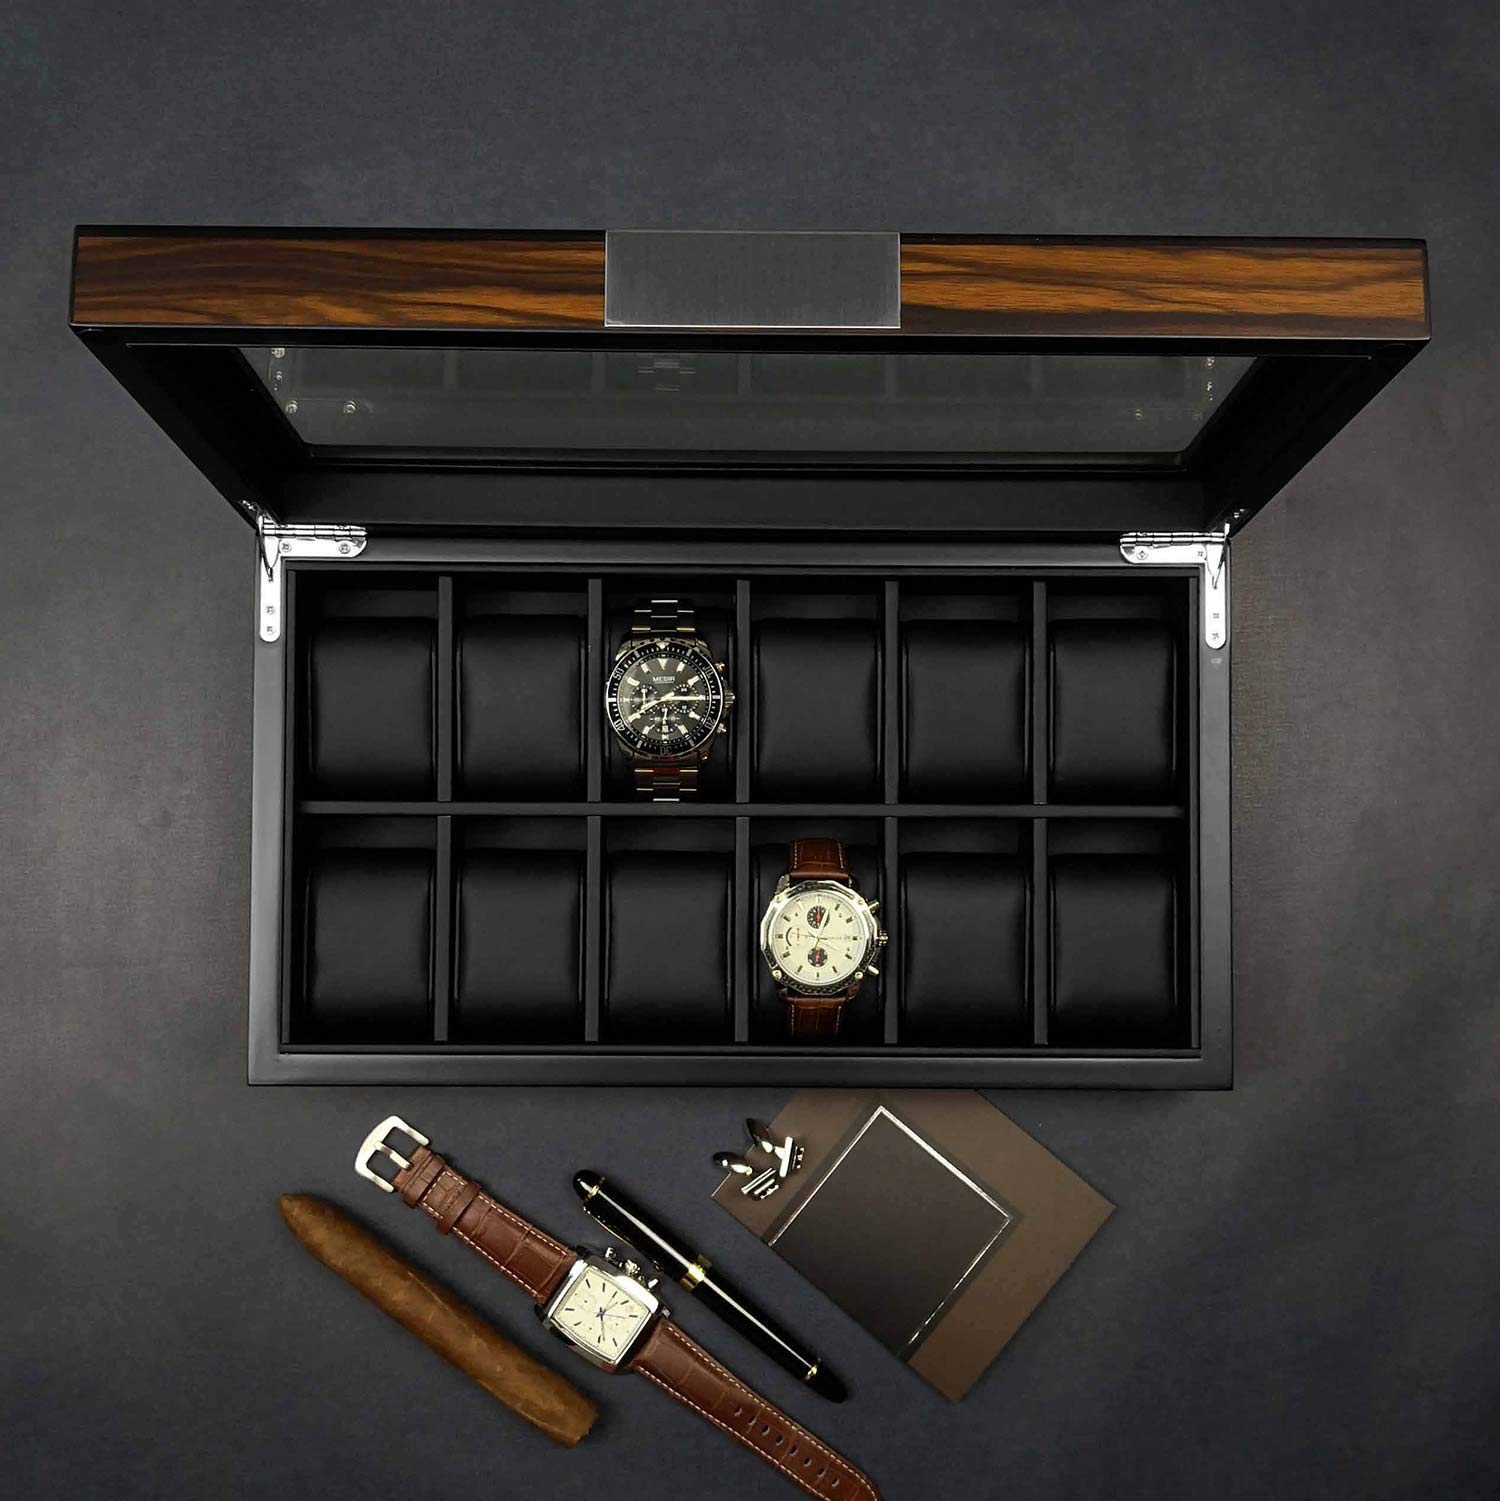 Lifomenz Co 12 Watch Box for Men Watch Display Case Wood Luxury Watch Box with Large Glass Window,Watch Organizer Box with Ultra Smooth PU Leather Interior